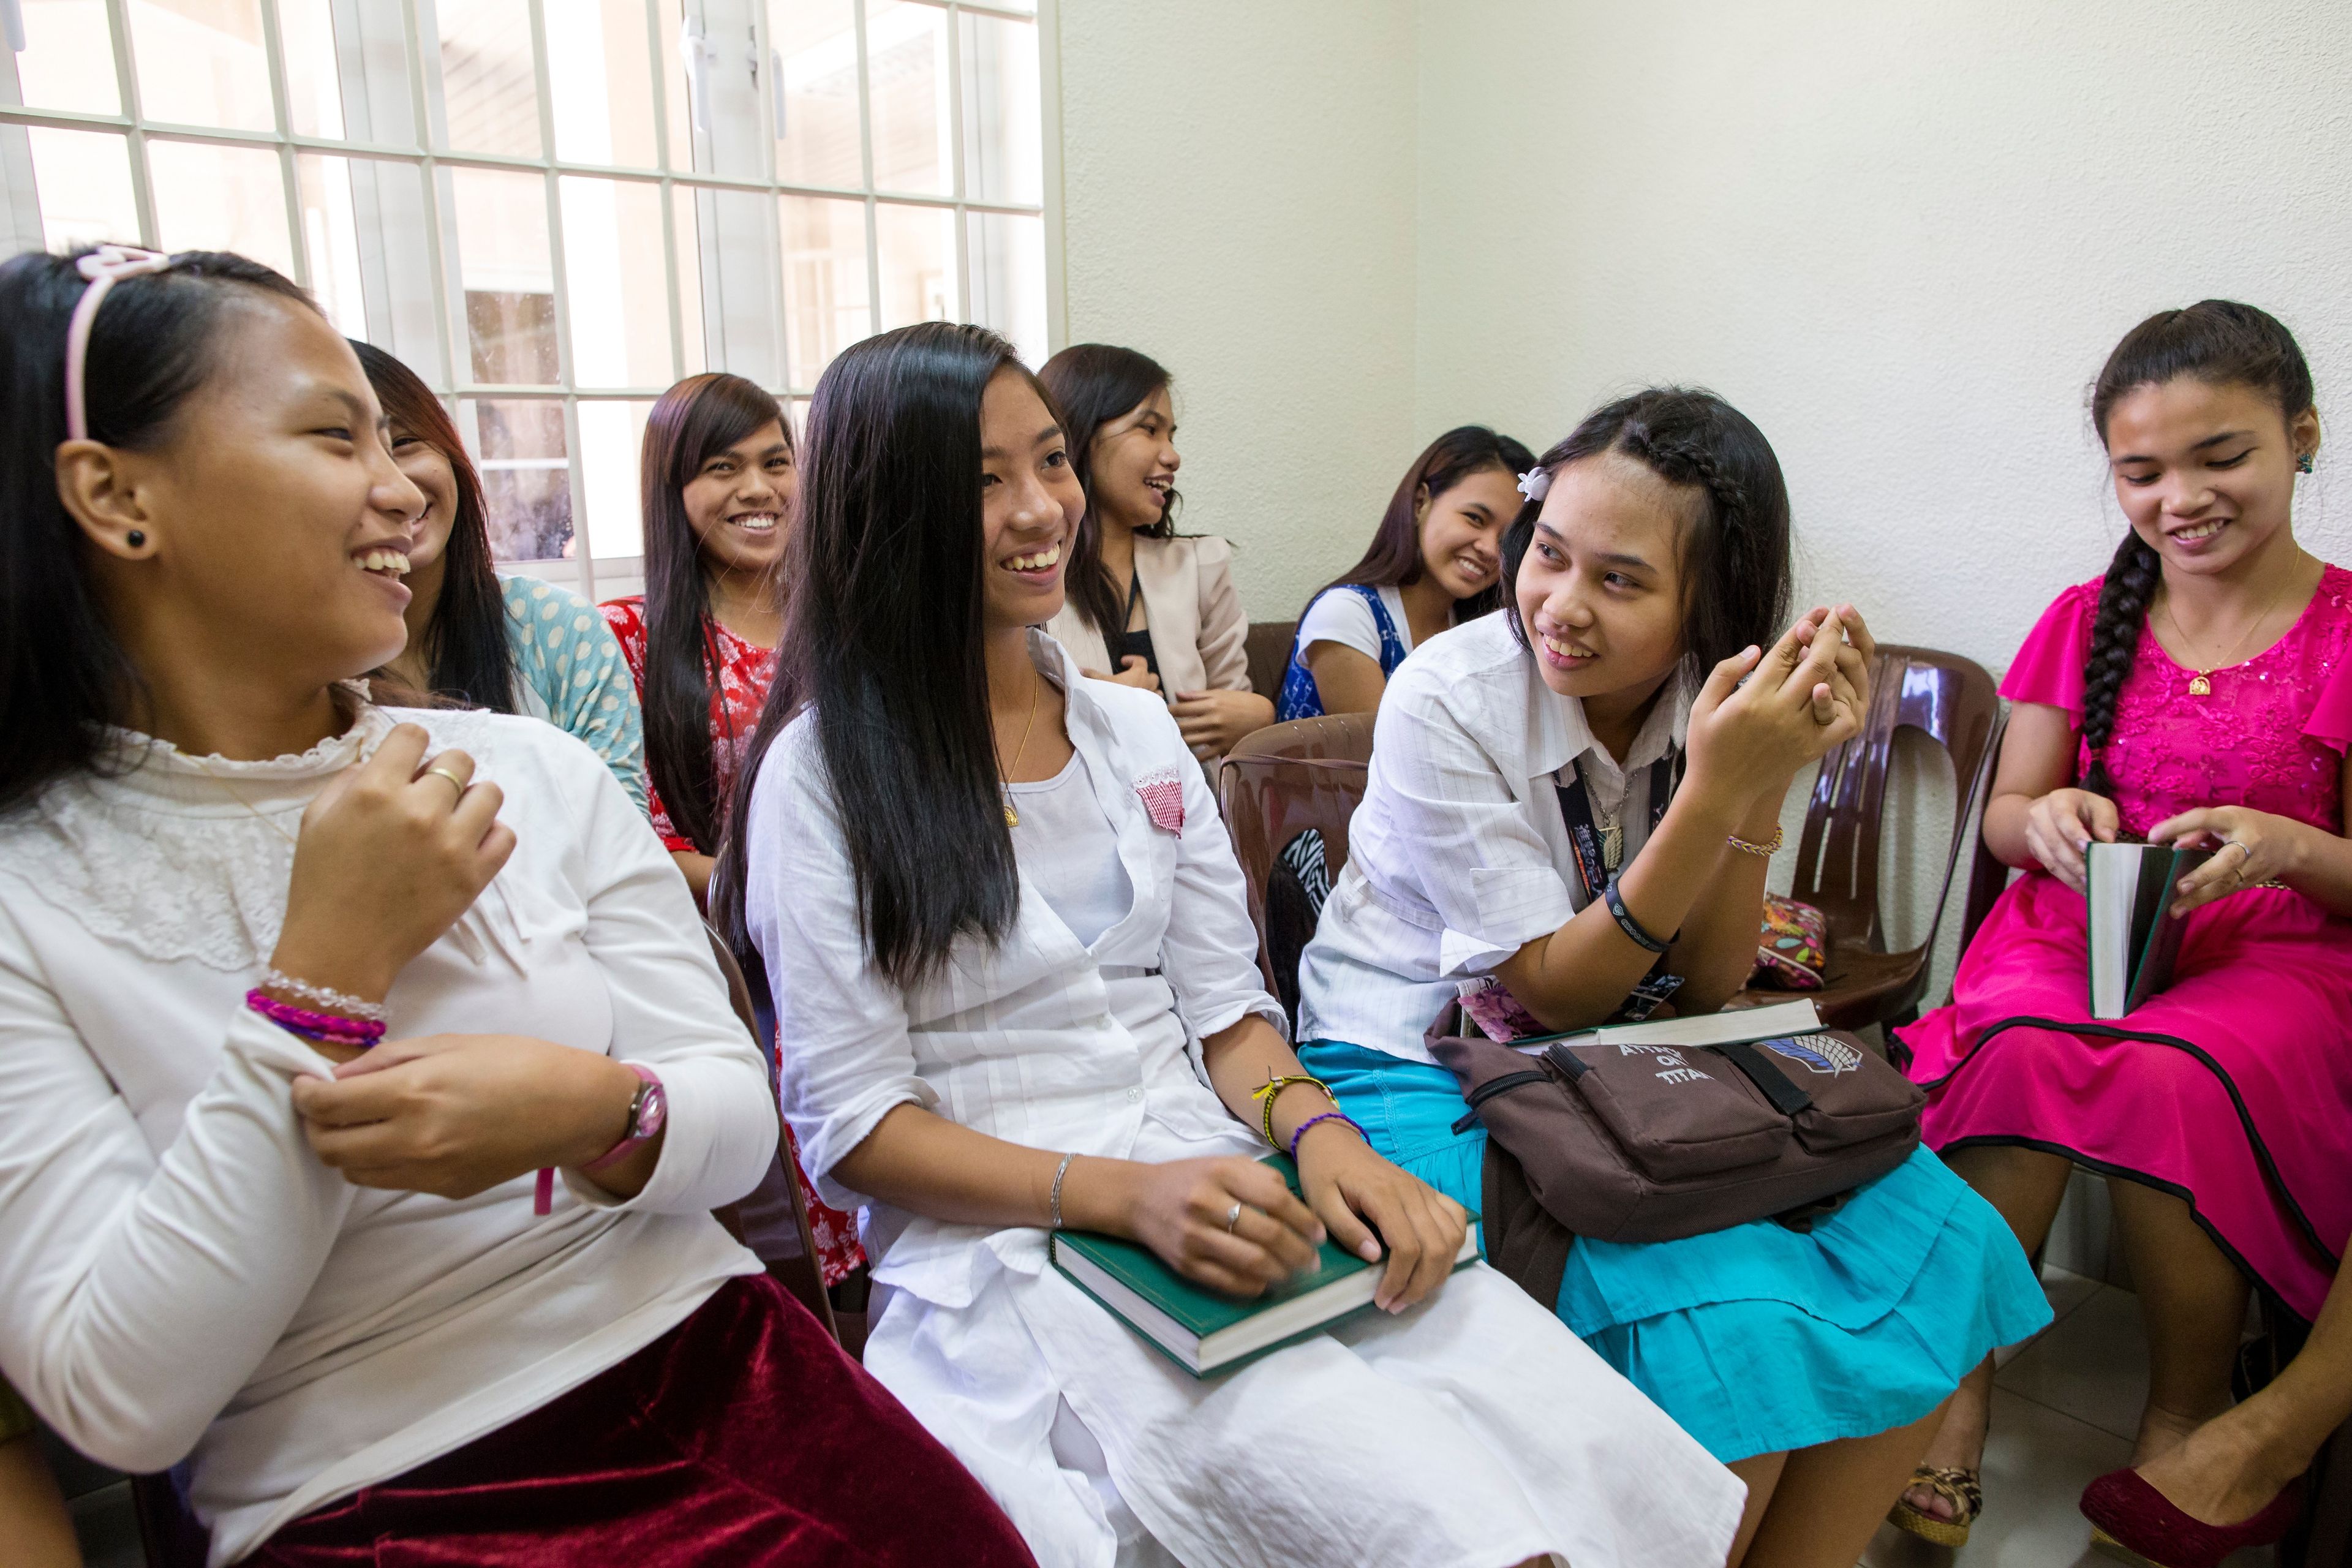 A group of young women in the Philippines sitting in a class with scriptures and hymnbooks on their laps.  